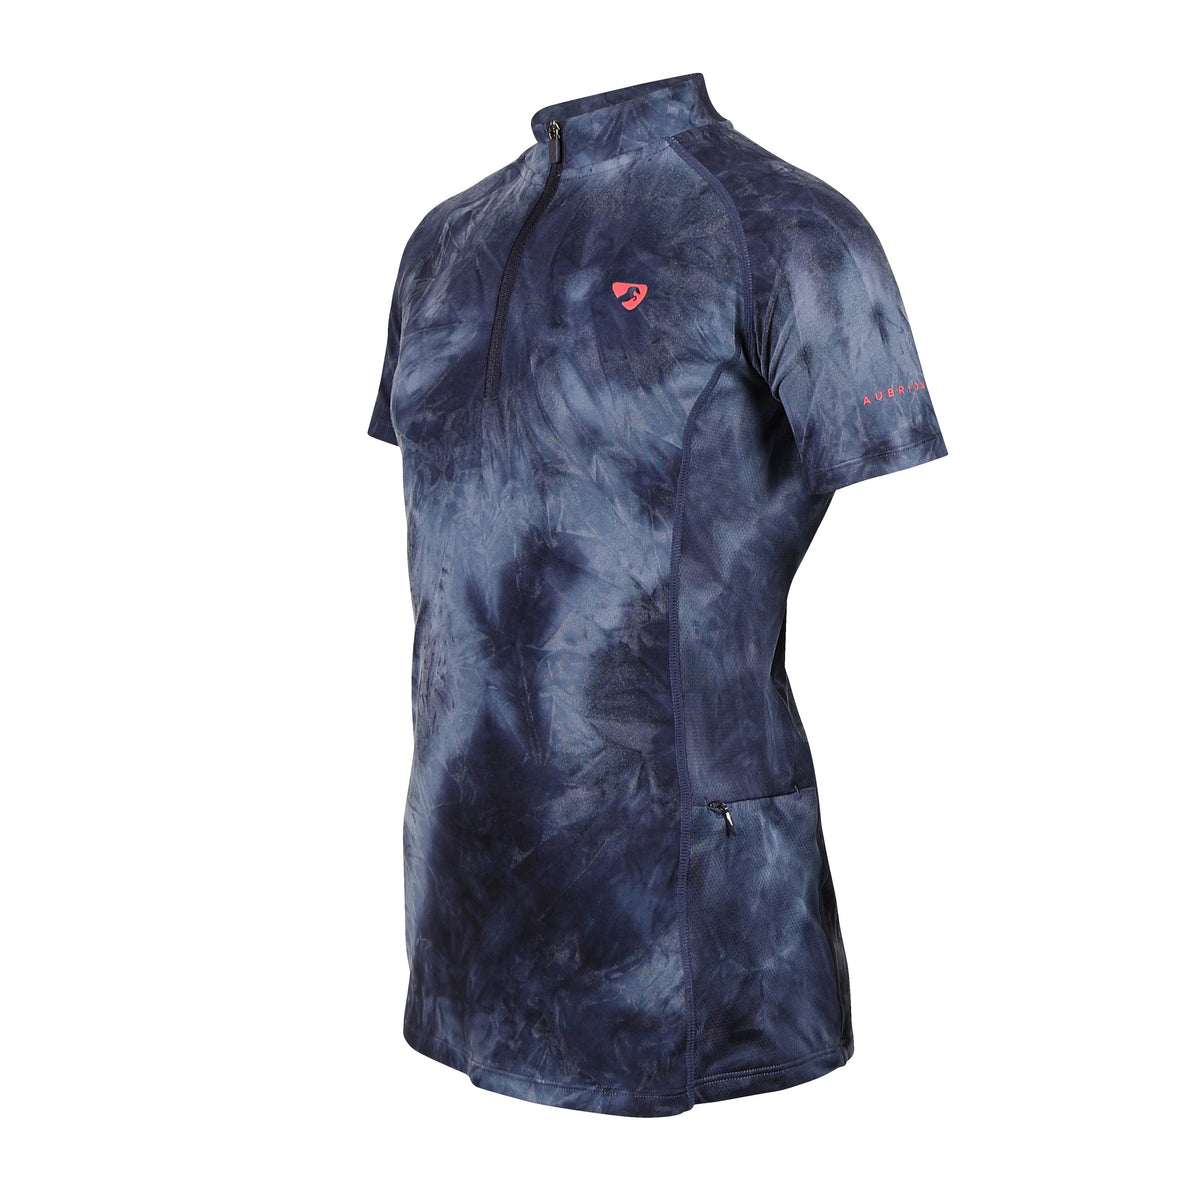 Shires Young Riders Aubrion Revive Short Sleeve Base Layer